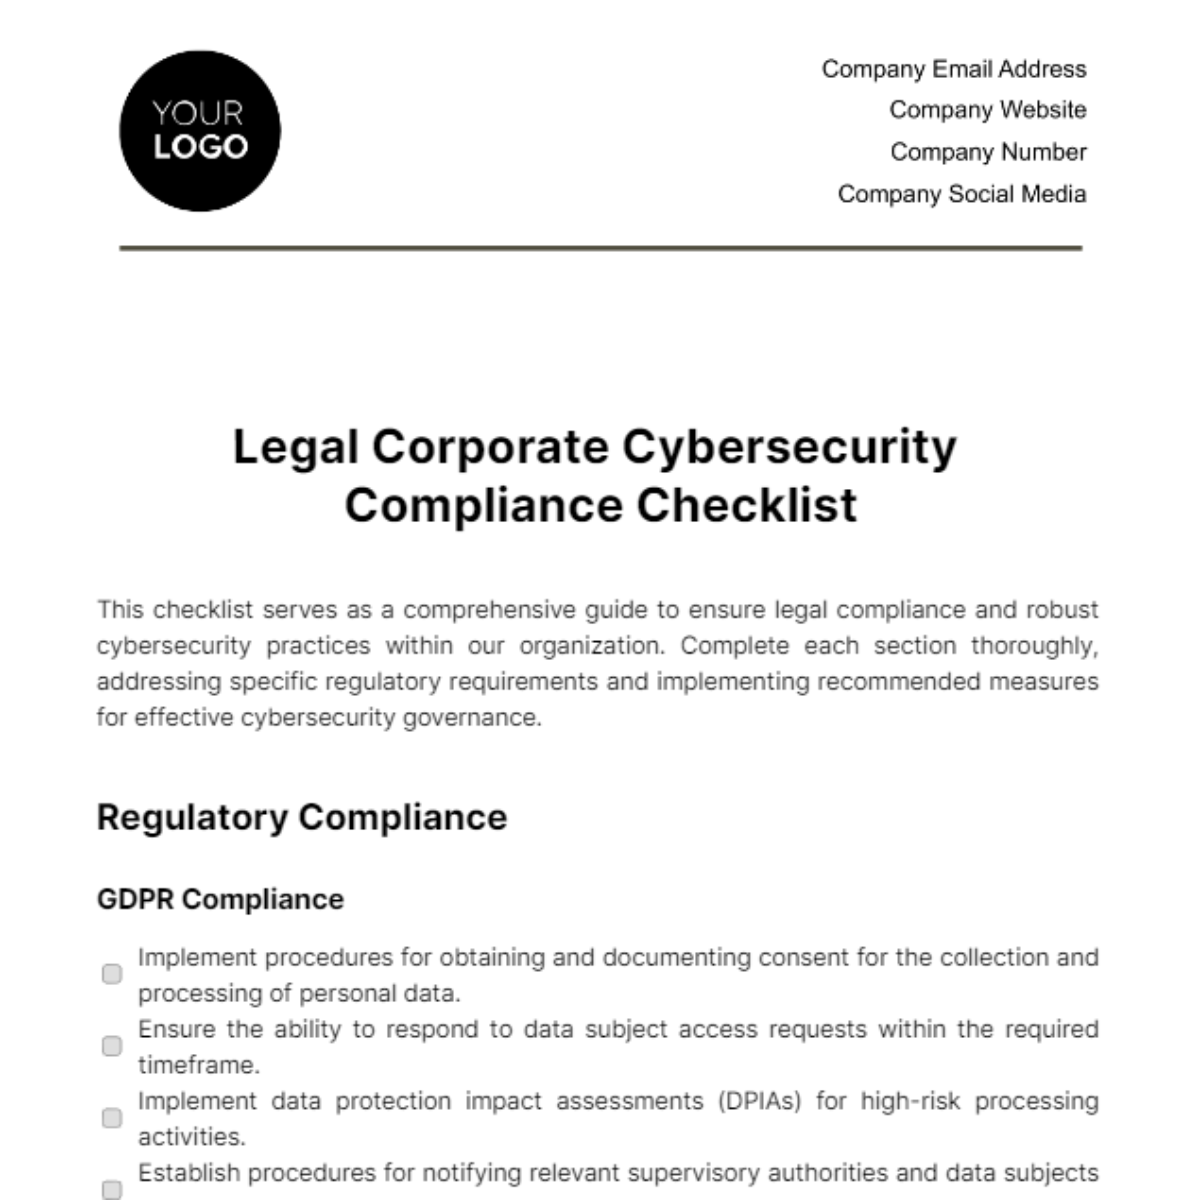 Free Legal Corporate Cybersecurity Compliance Checklist Template